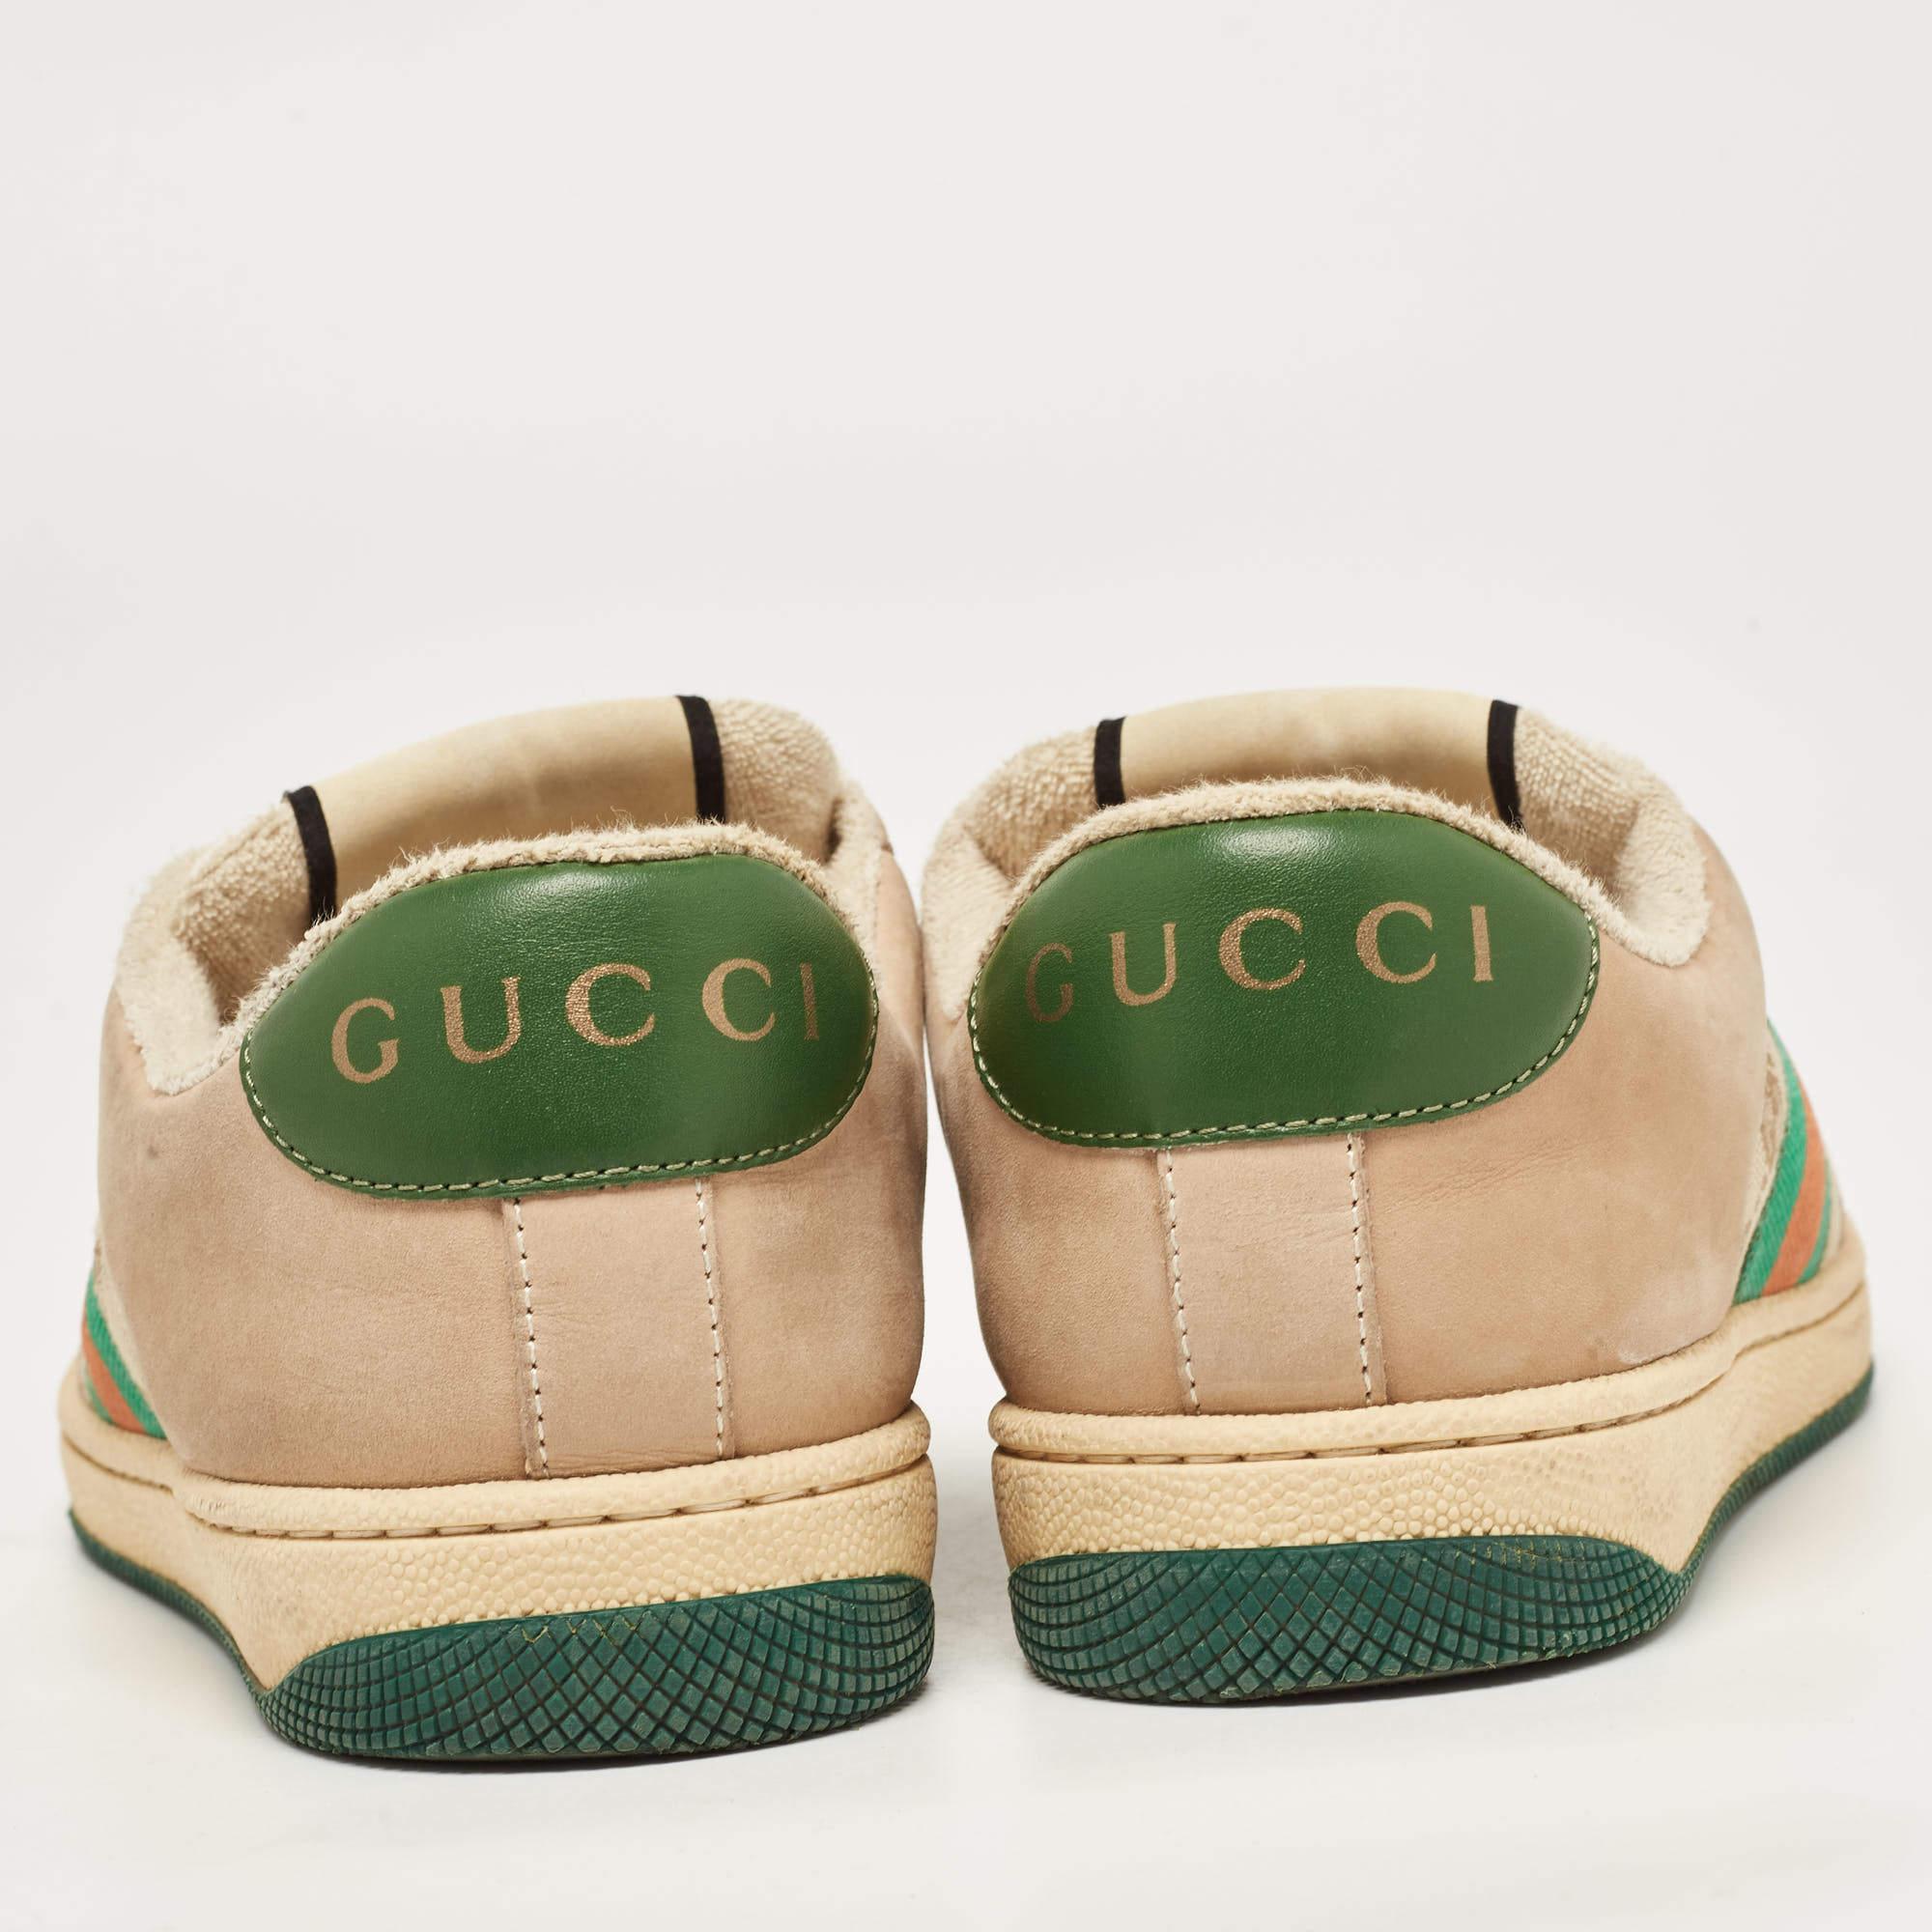 Gucci Multicolor Nubuck and Leather Screener Sneakers Size 37 2